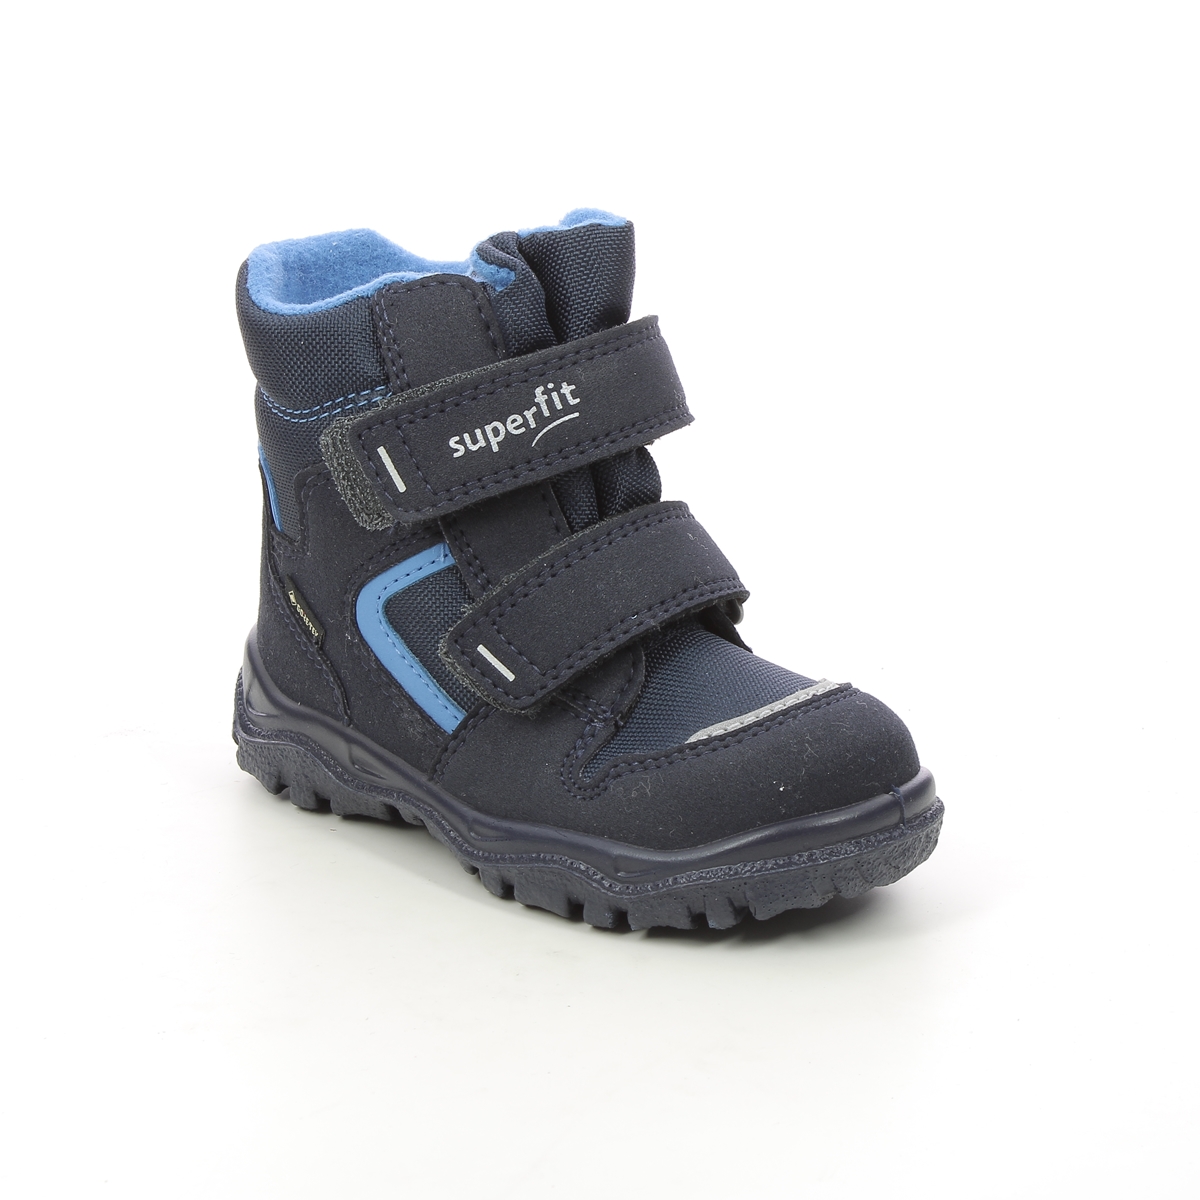 Superfit Husky Inf Gtx Navy Kids Toddler Boys Boots 1000047-8000 In Size 24 In Plain Navy